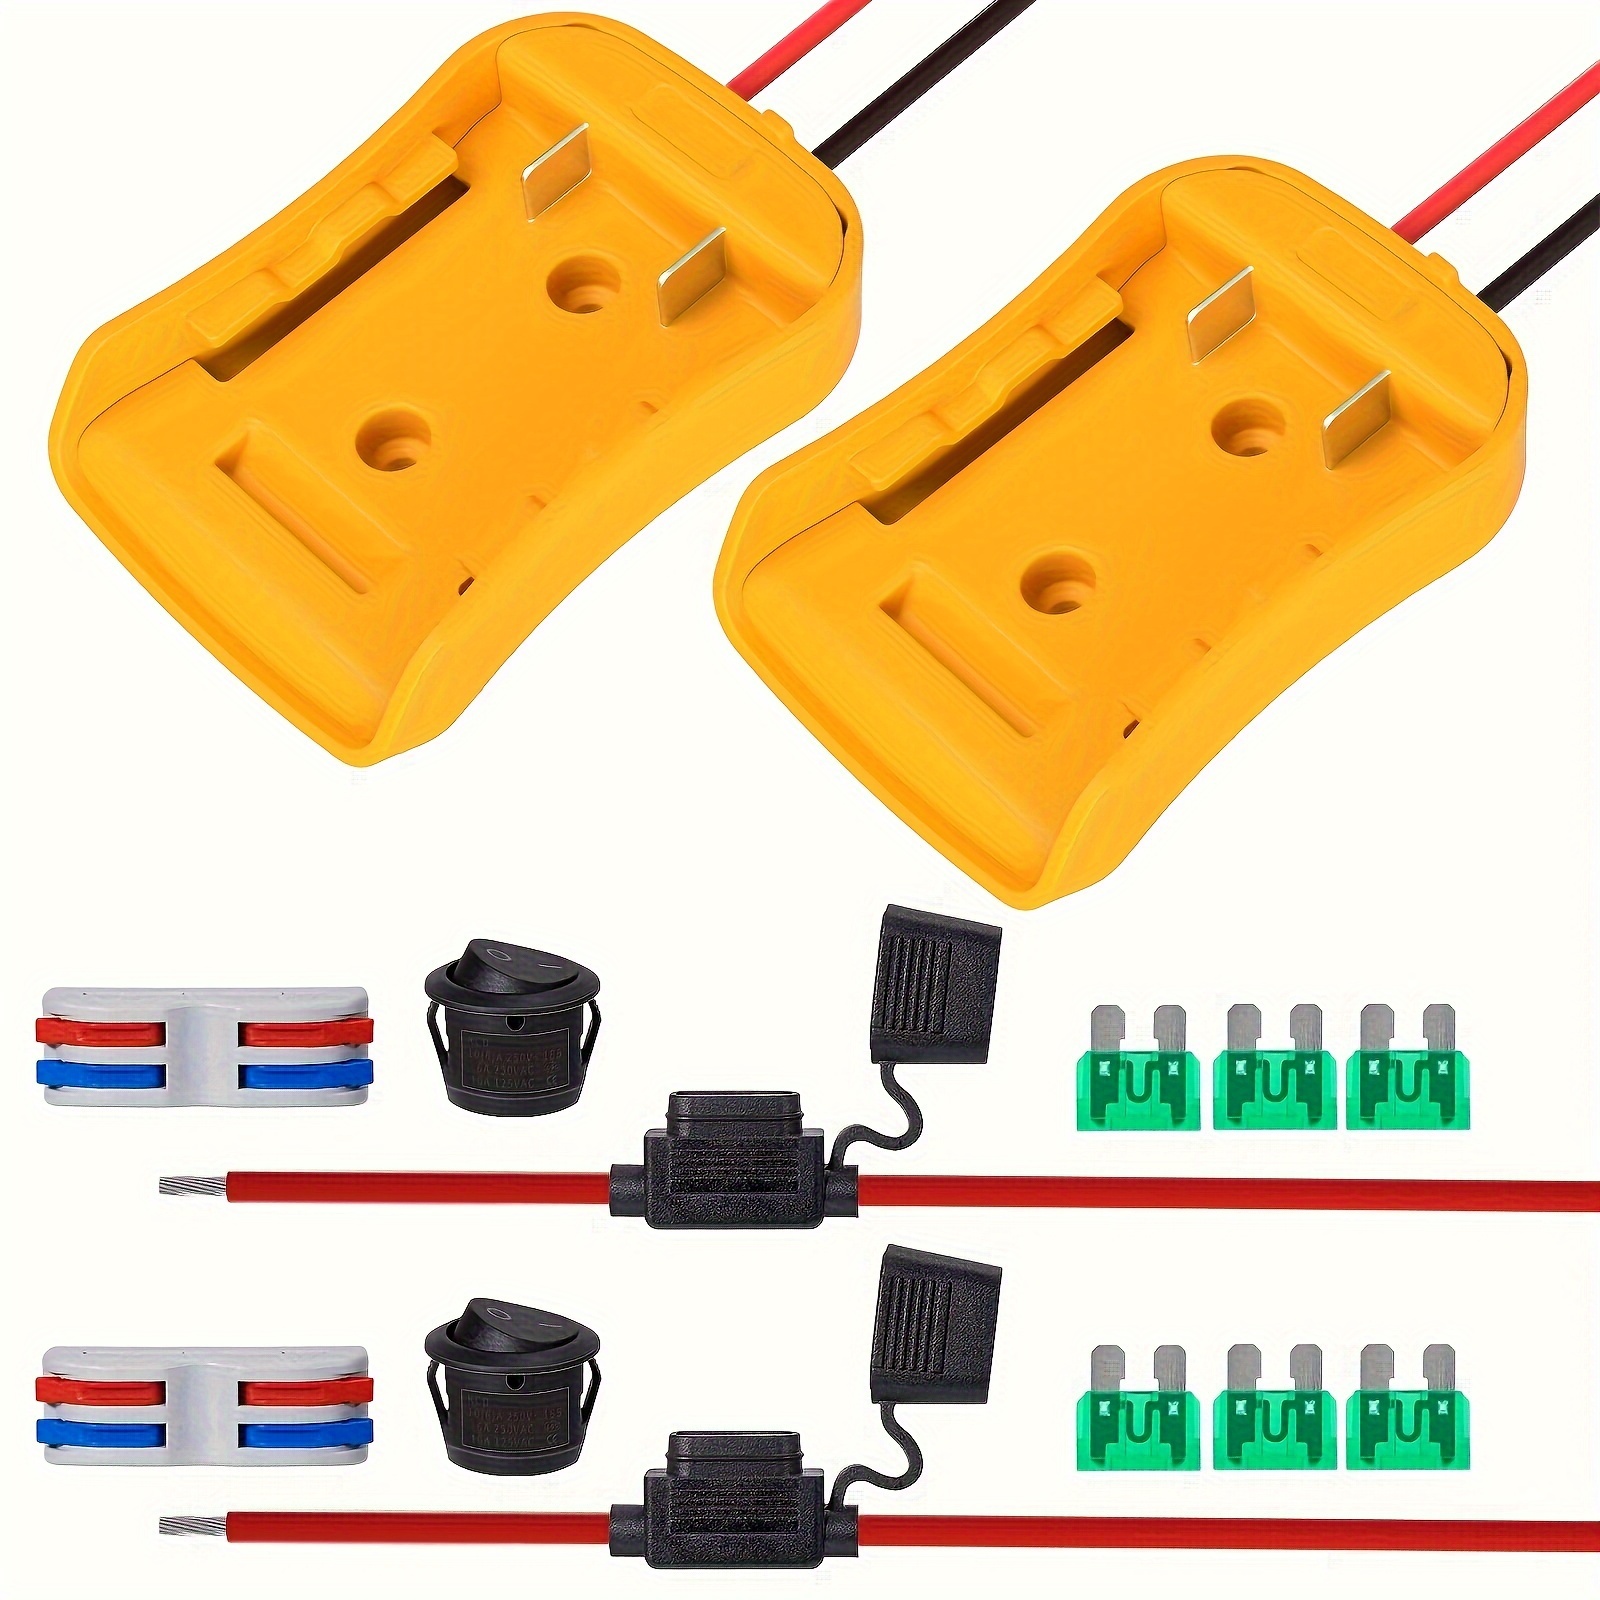 

1/2pcs Power Wheels Adapter For 20v Dock Power Connector, With Fuses & Wire Terminals, 14awg Wire